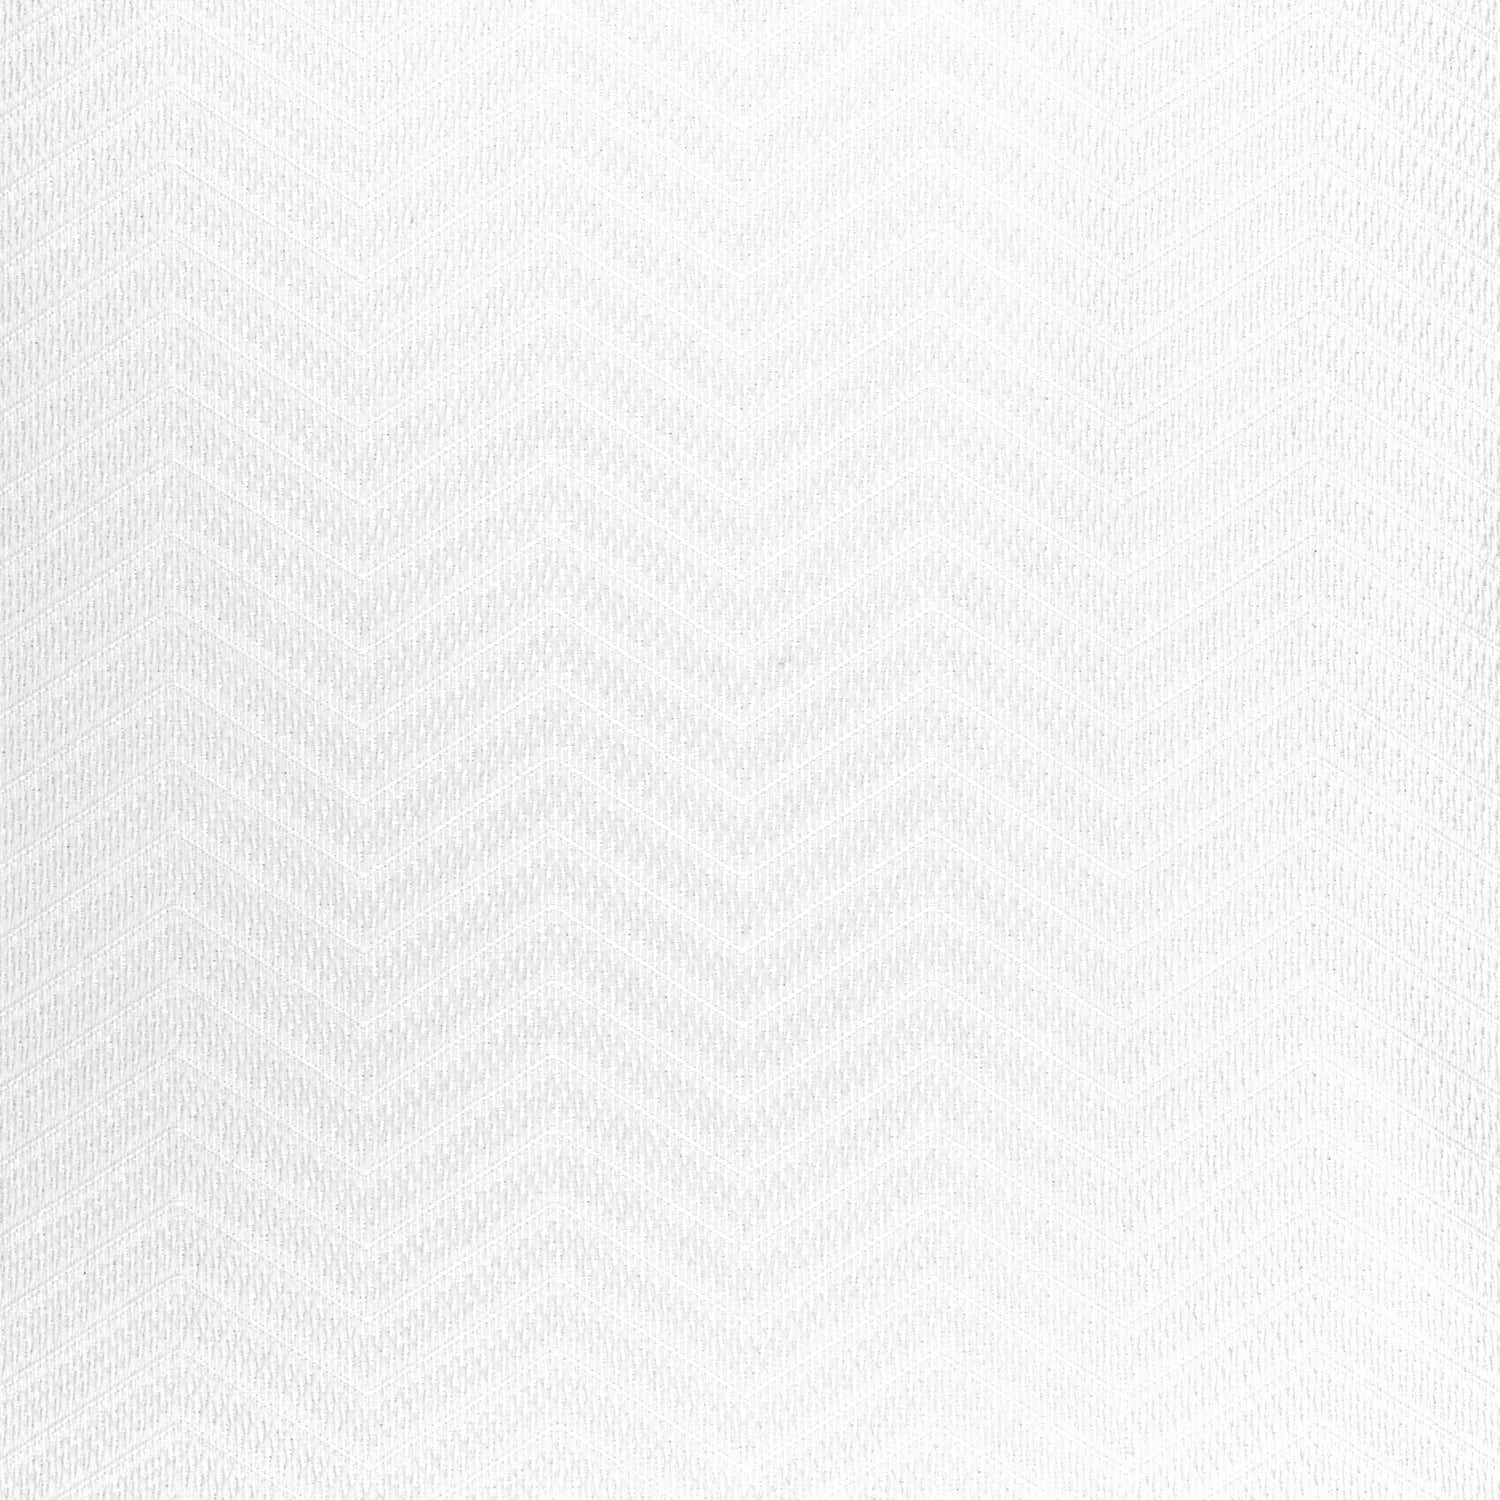 Matari Chevron fabric in white color - pattern number W80632 - by Thibaut in the Pinnacle collection